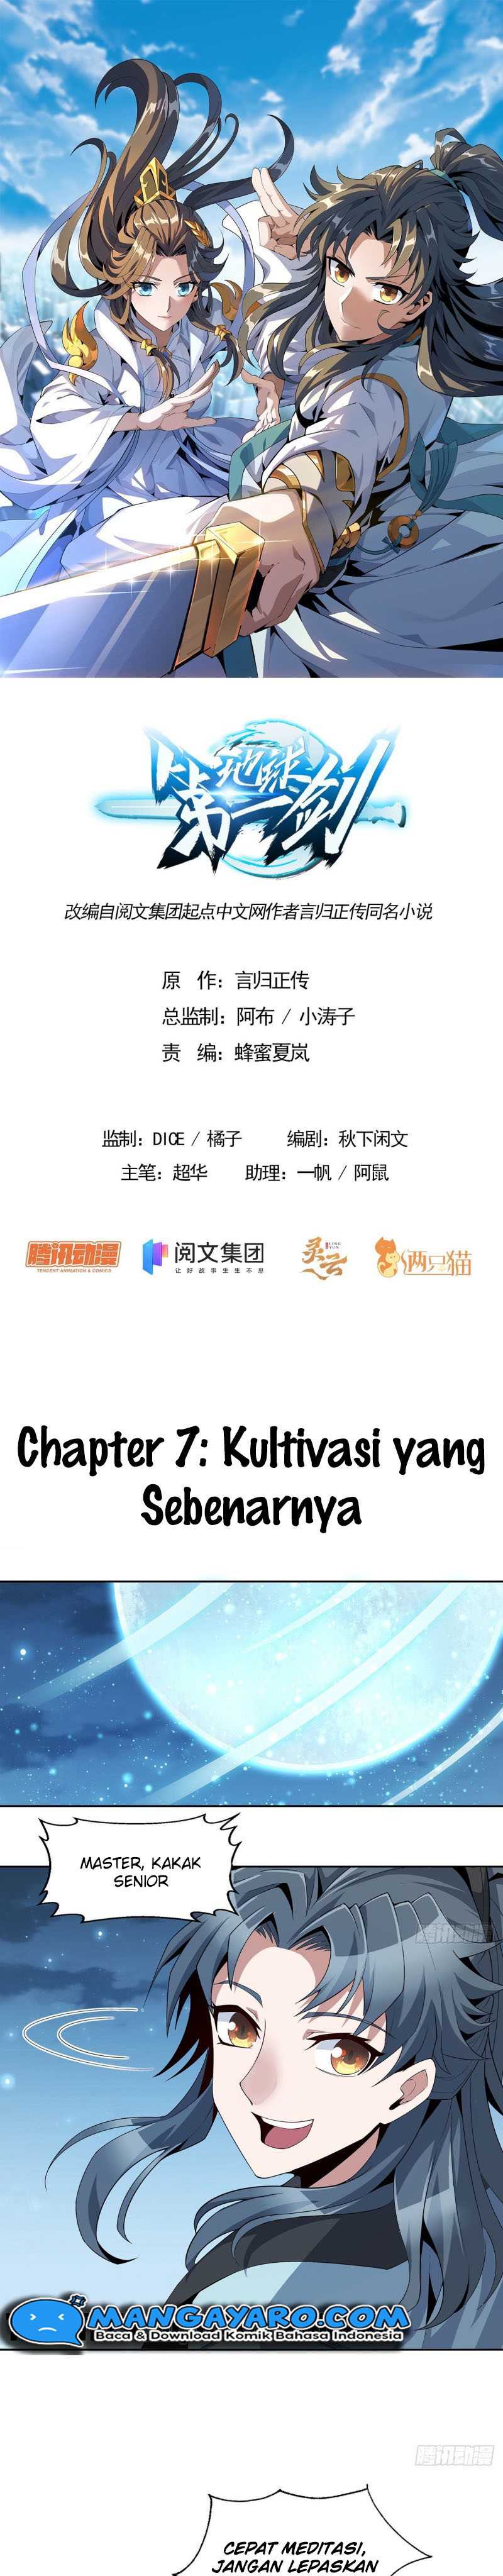 The First Sword of Earth Chapter 07